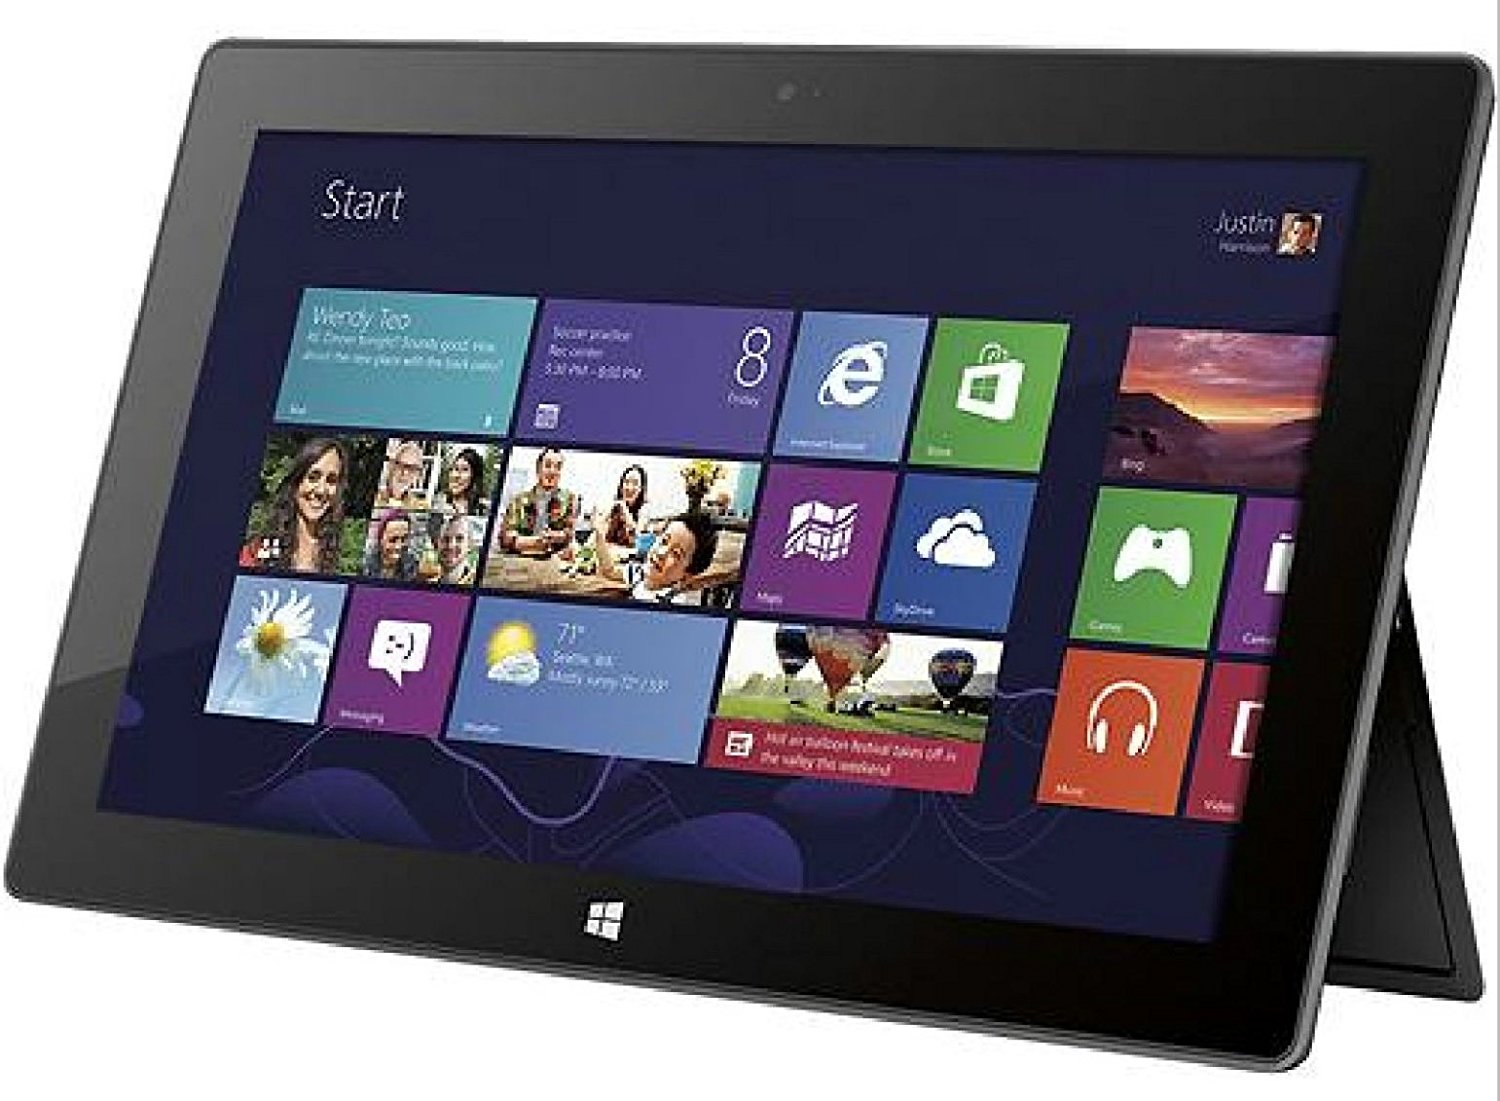 MICROSOFT SURFACE 64GB CON MICROSOFT OFFICE HOME Y STUDENT 2013 RT WIFI BLUETOOTH